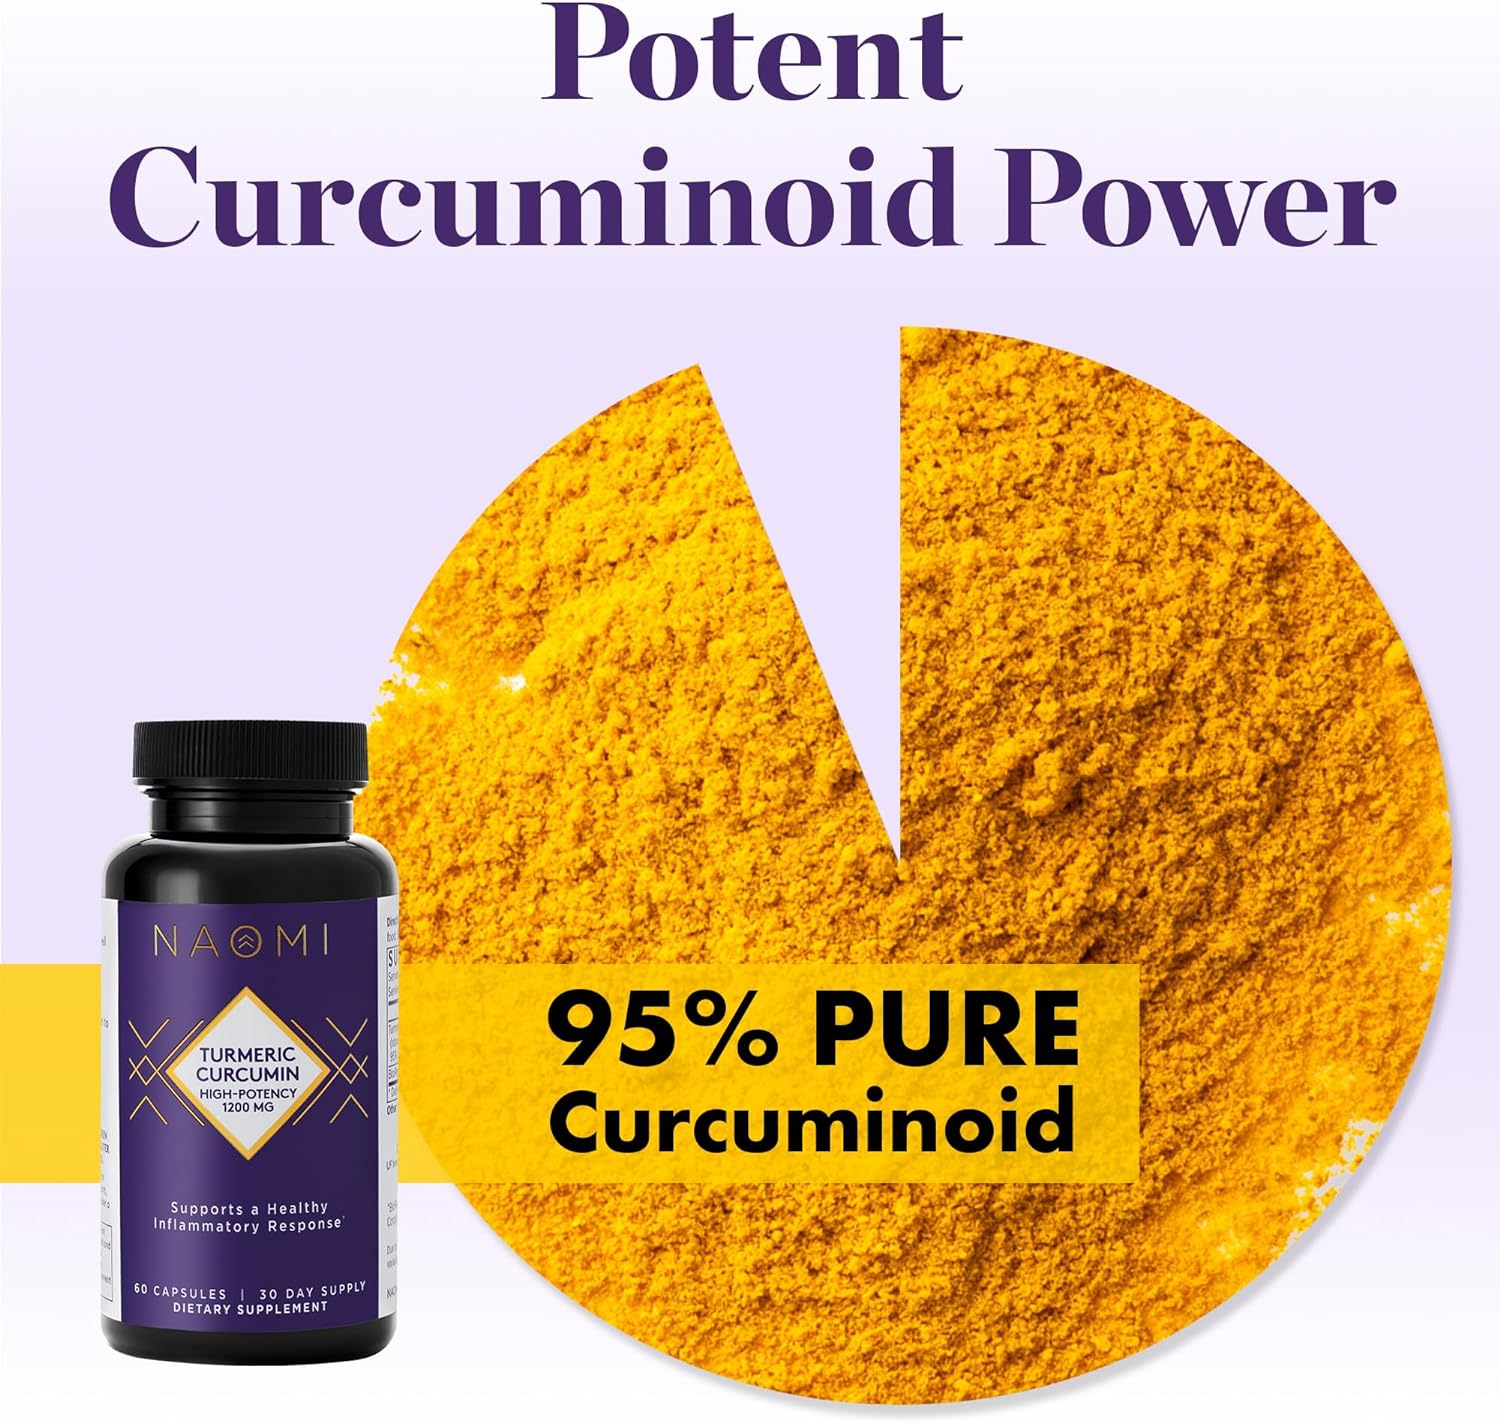 NAOMI Turmeric Curcumin High-Potency 1,200 mg, 95% Curcuminoids & BioPerine Black Pepper Extract to Boost Absorption up to 2000%, Extra-Strength Joint, Muscle, Brain Support, 60 Caps, 30-Day Supply : Health & Household